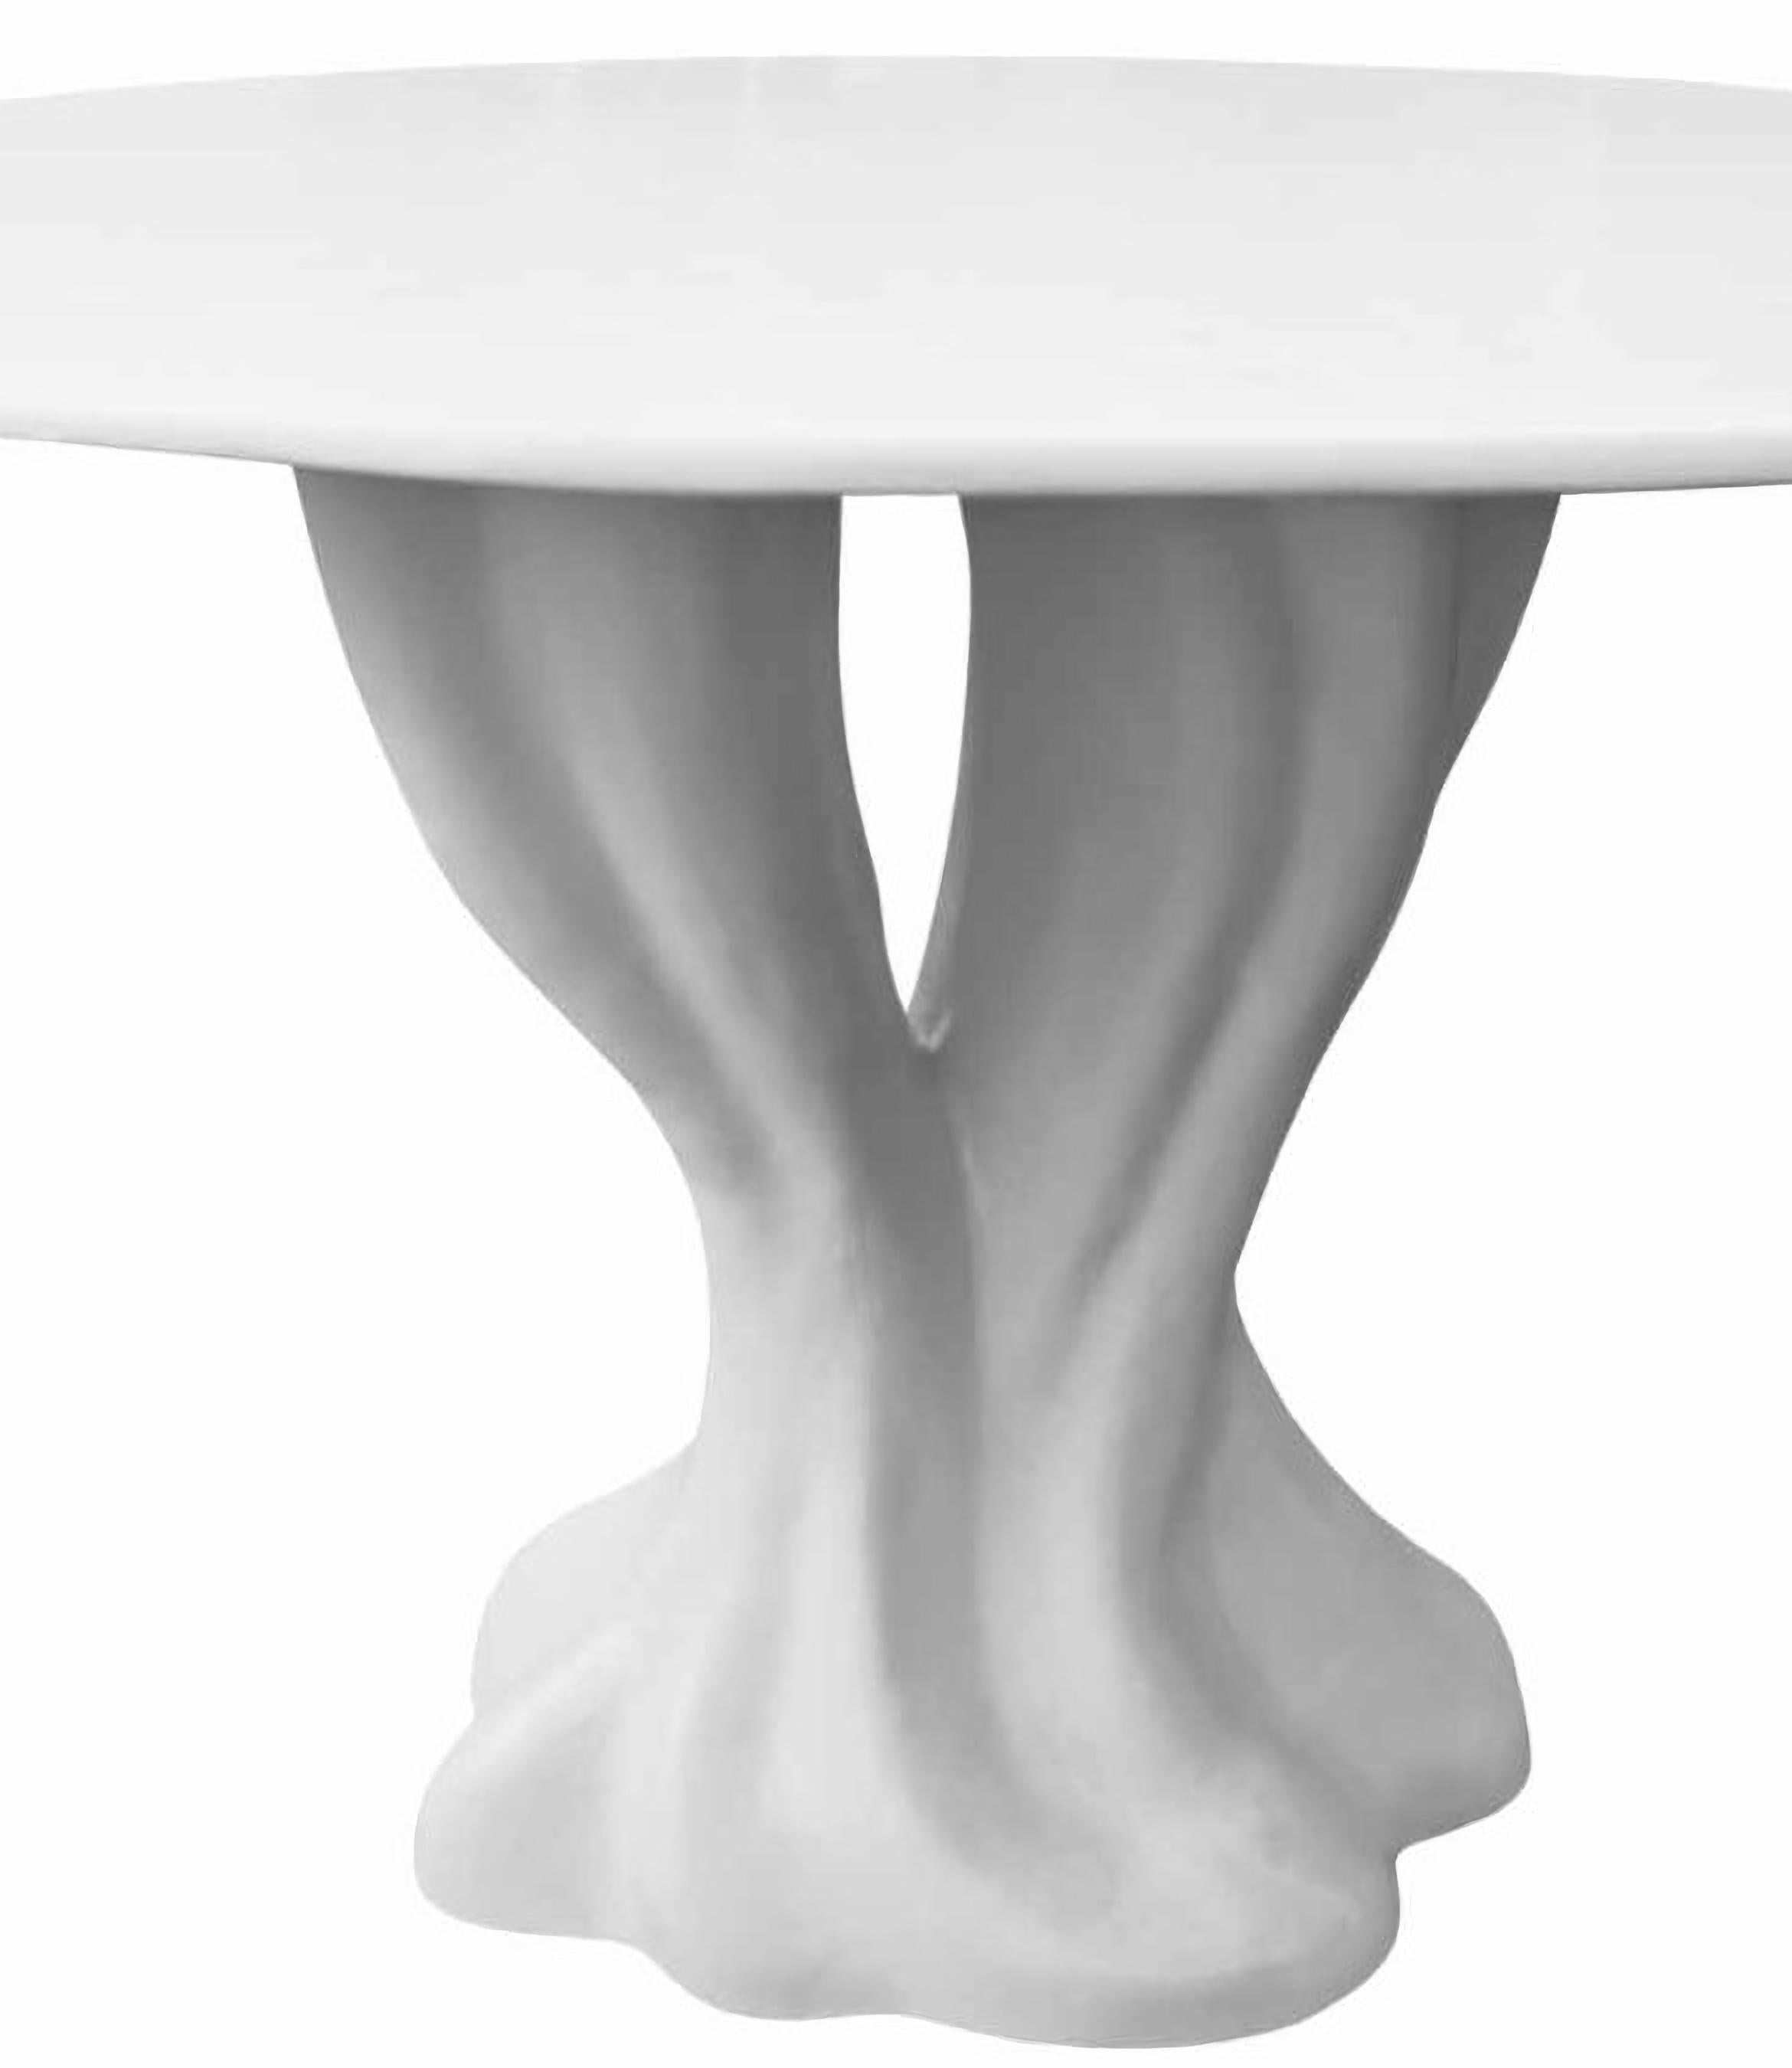 Dining table

General information

Dimensions (cm): Ø120 x 75
Dimensions (in): Ø47.2 x 29.5
Weight (kg): 56
Weight (lbs): 123.5
Seats: 4 a 6

Materials and colors

Top and base: Resin reinforced with fiberglass, lacquered in matte white.


